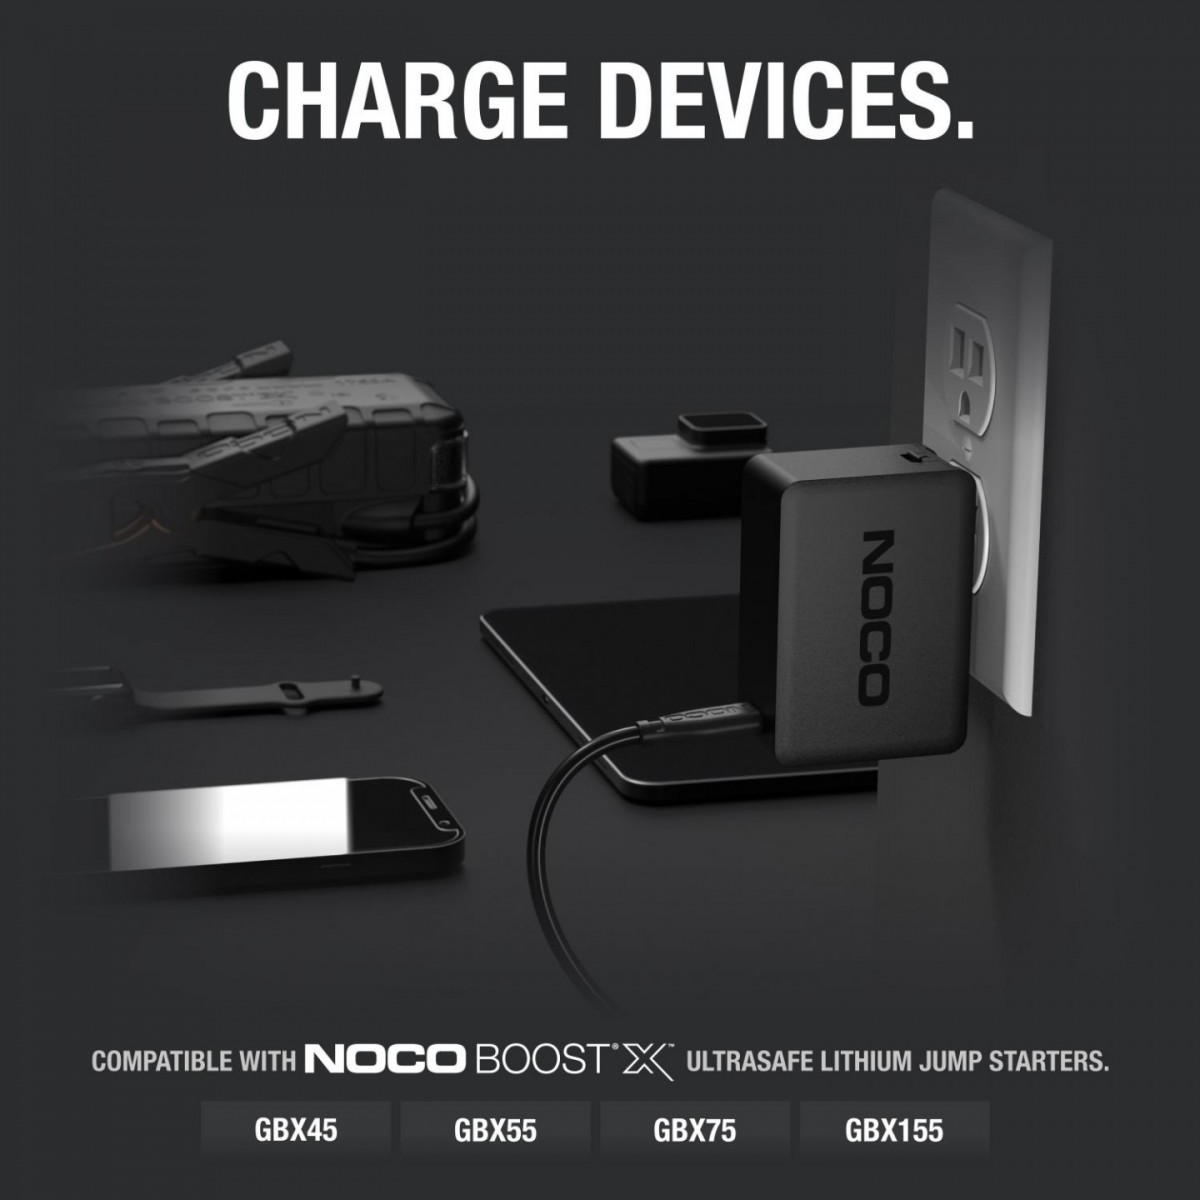 u65-main-6-charge-devices-compatible-with-noco-boostx-gbx45-gbx55-gbx75-gbx155-1